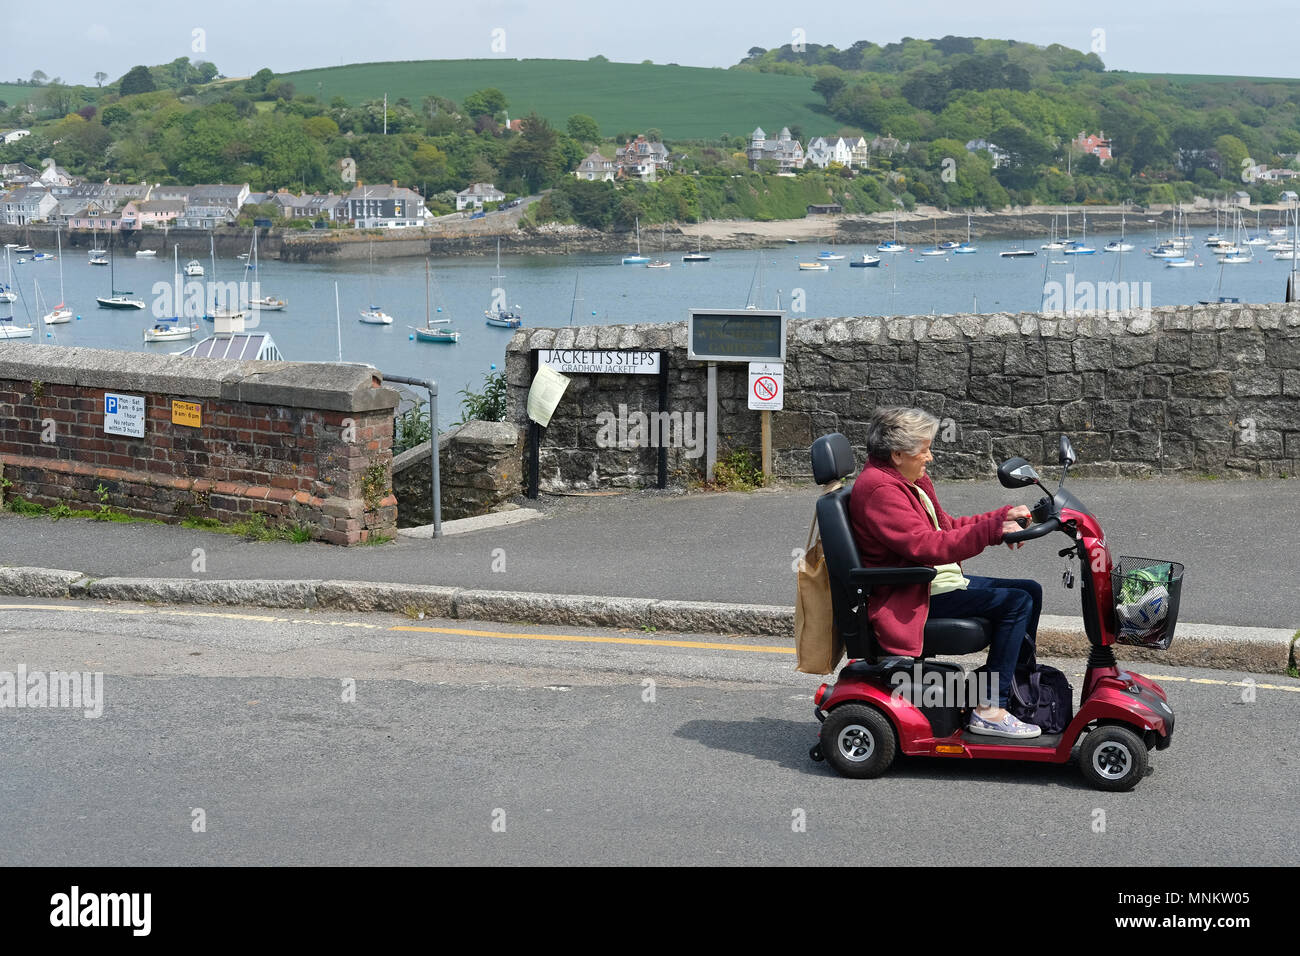 A woman on a mobility scooter in Falmouth, Cornwall Stock Photo